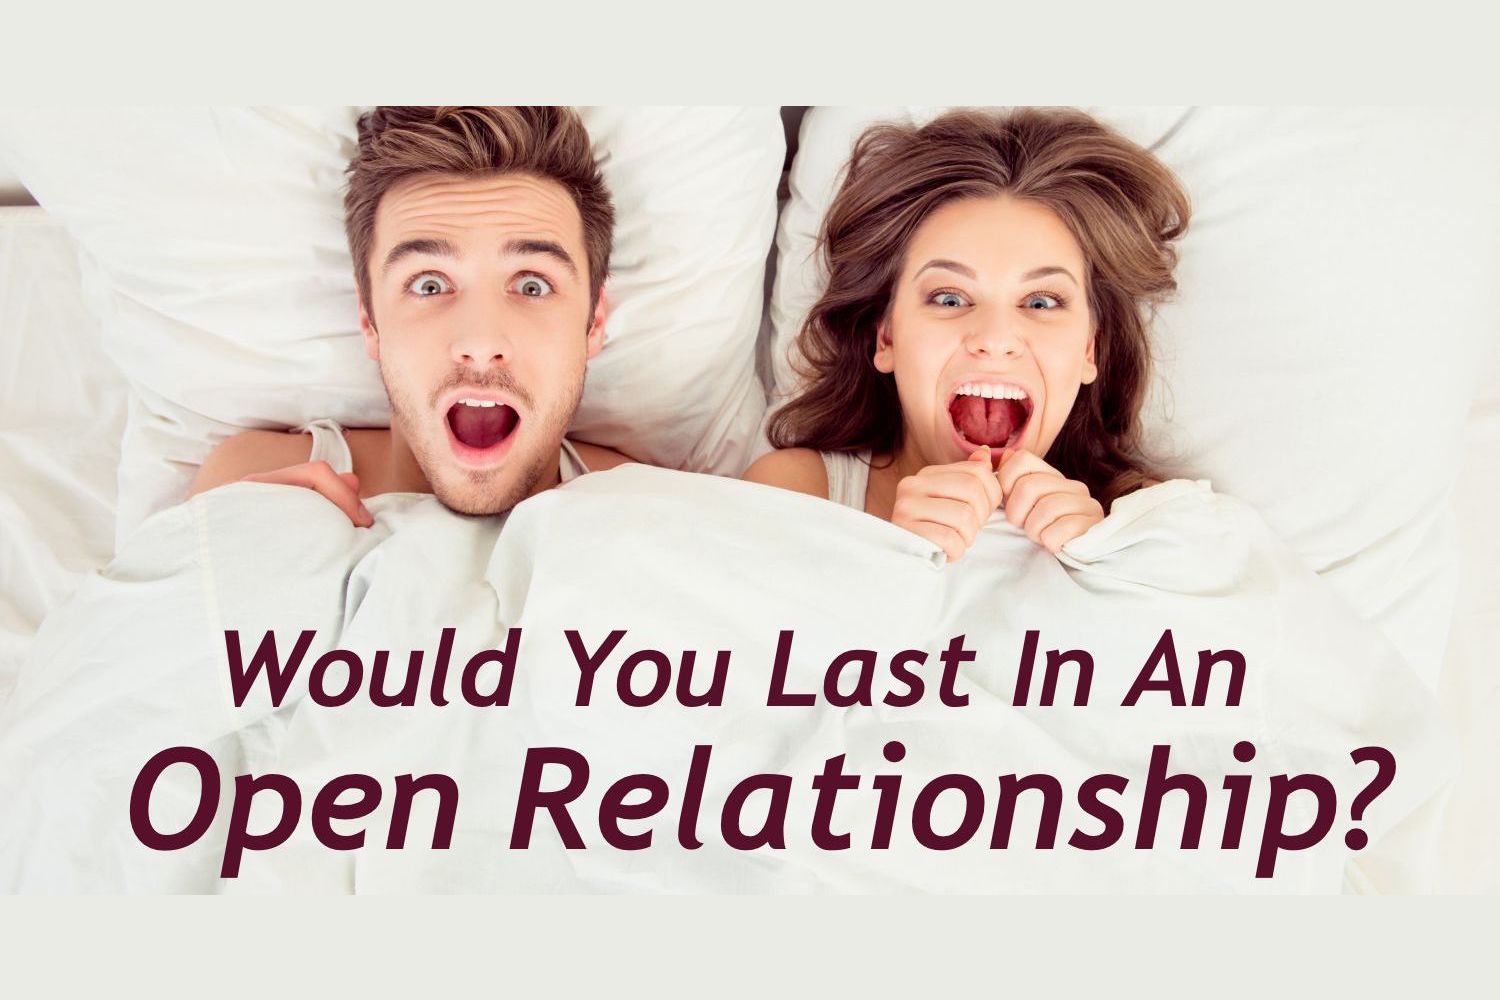 can an open relationship last